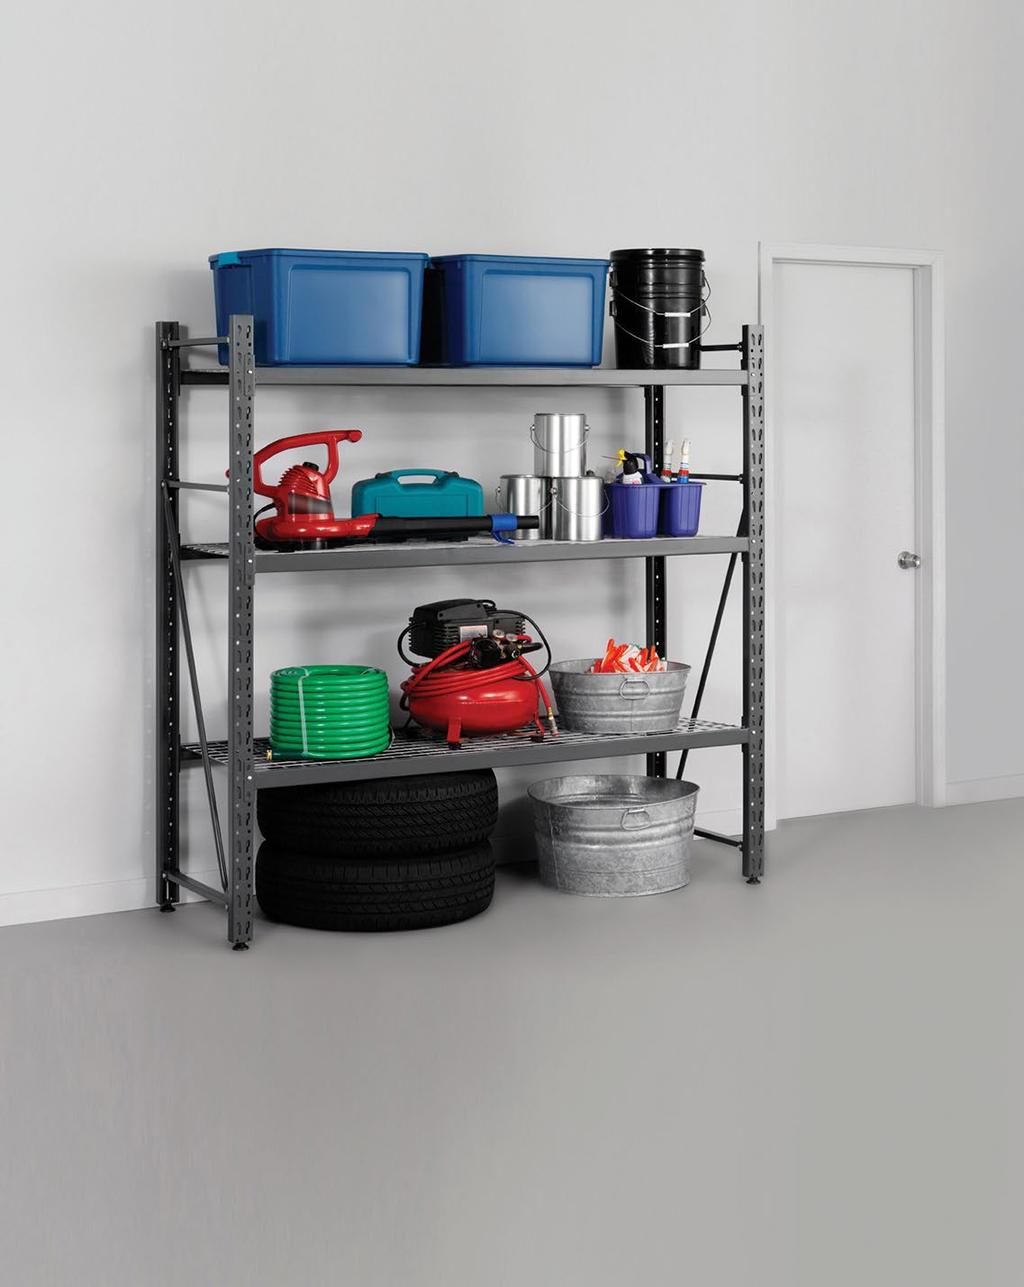 pro series shelves Heavy-duty strength. For extra-heavy loads. Frequently asked questions Pro Series Shelves Can I install 1 shelf instead of 3? No, the structure requires a minimum of 2 shelves.